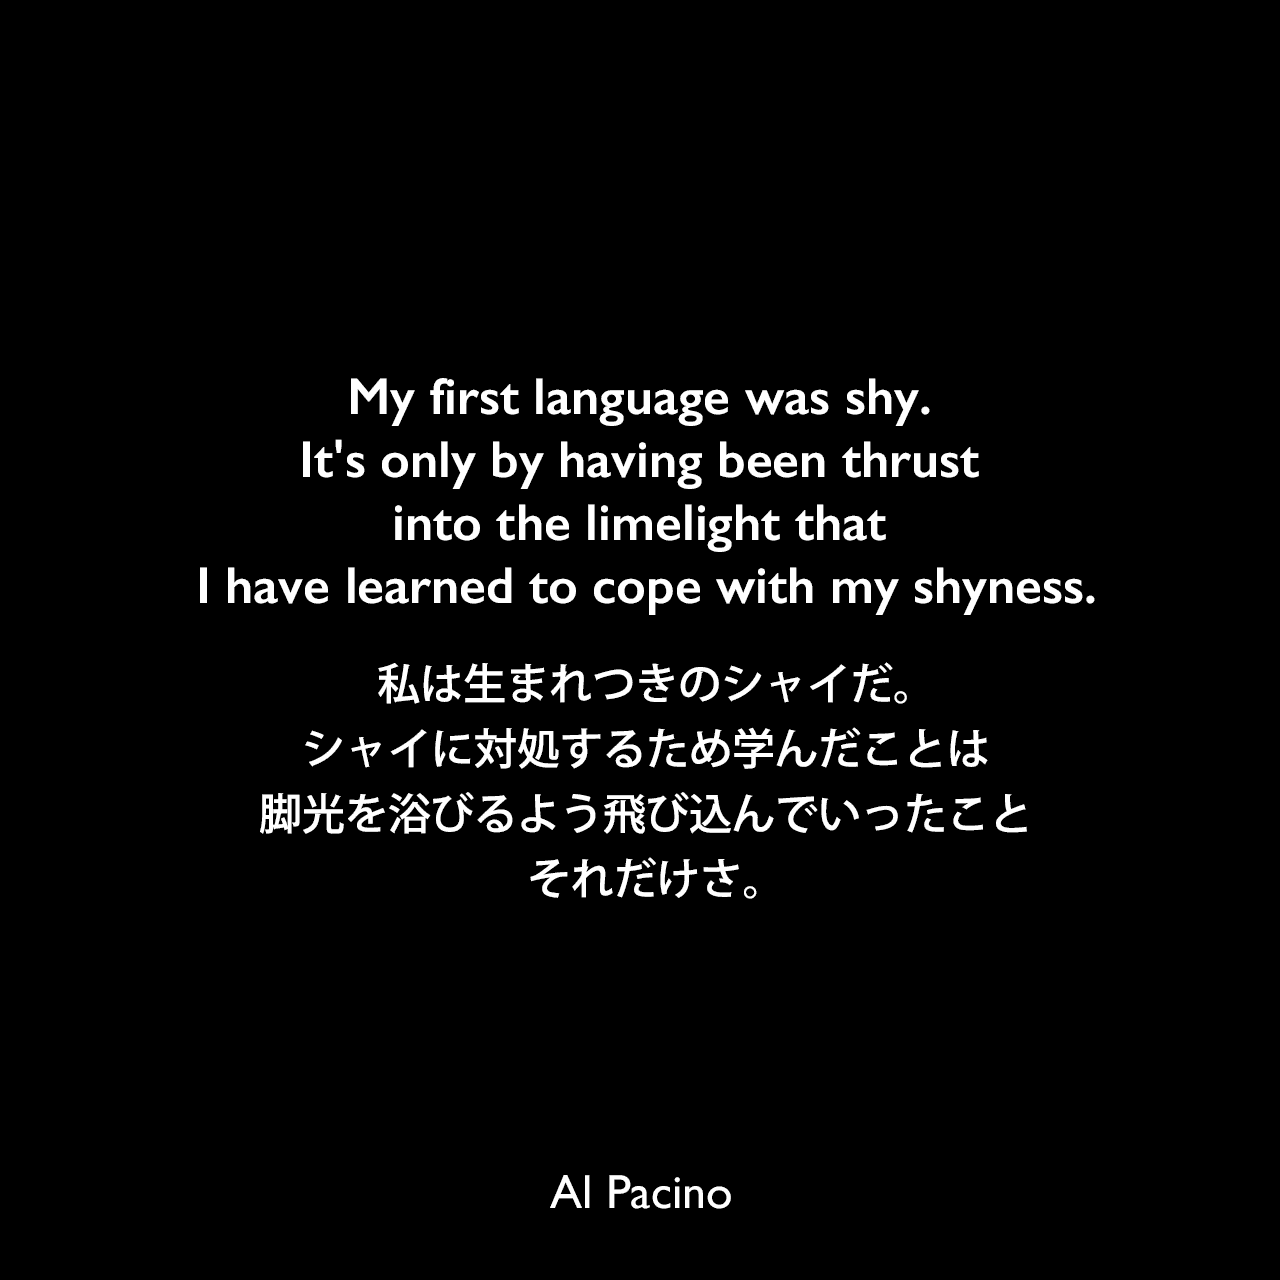 My first language was shy. It's only by having been thrust into the limelight that I have learned to cope with my shyness.私は生まれつきのシャイだ。シャイに対処するため学んだことは脚光を浴びるよう飛び込んでいったこと、それだけさ。Al Pacino